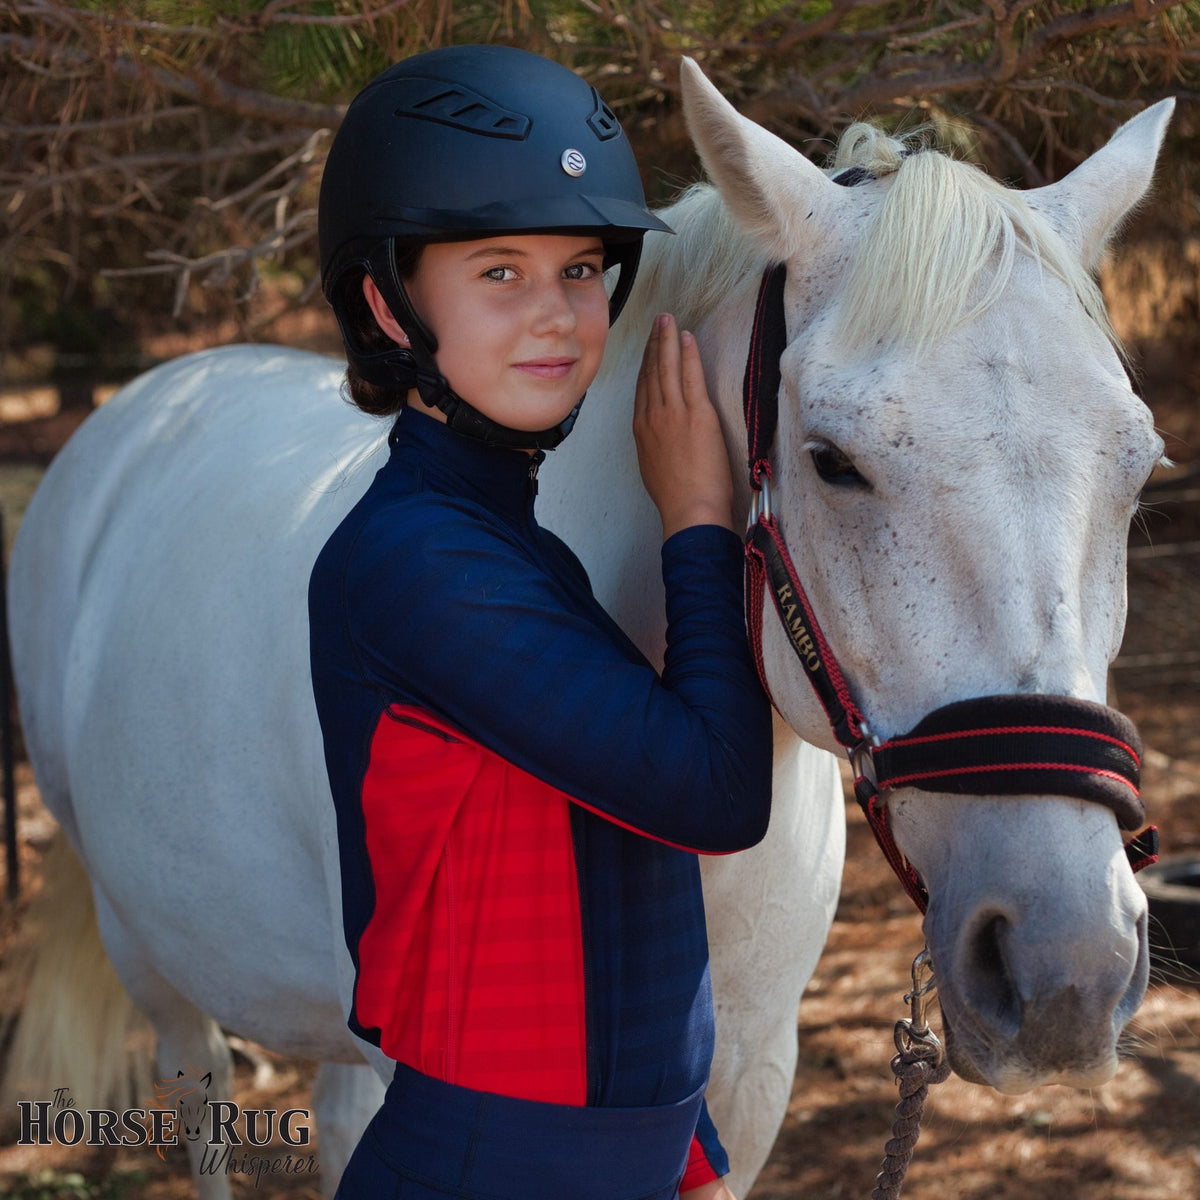 Lady holding grey horse, wearing navy long sleeve shirt with red side.